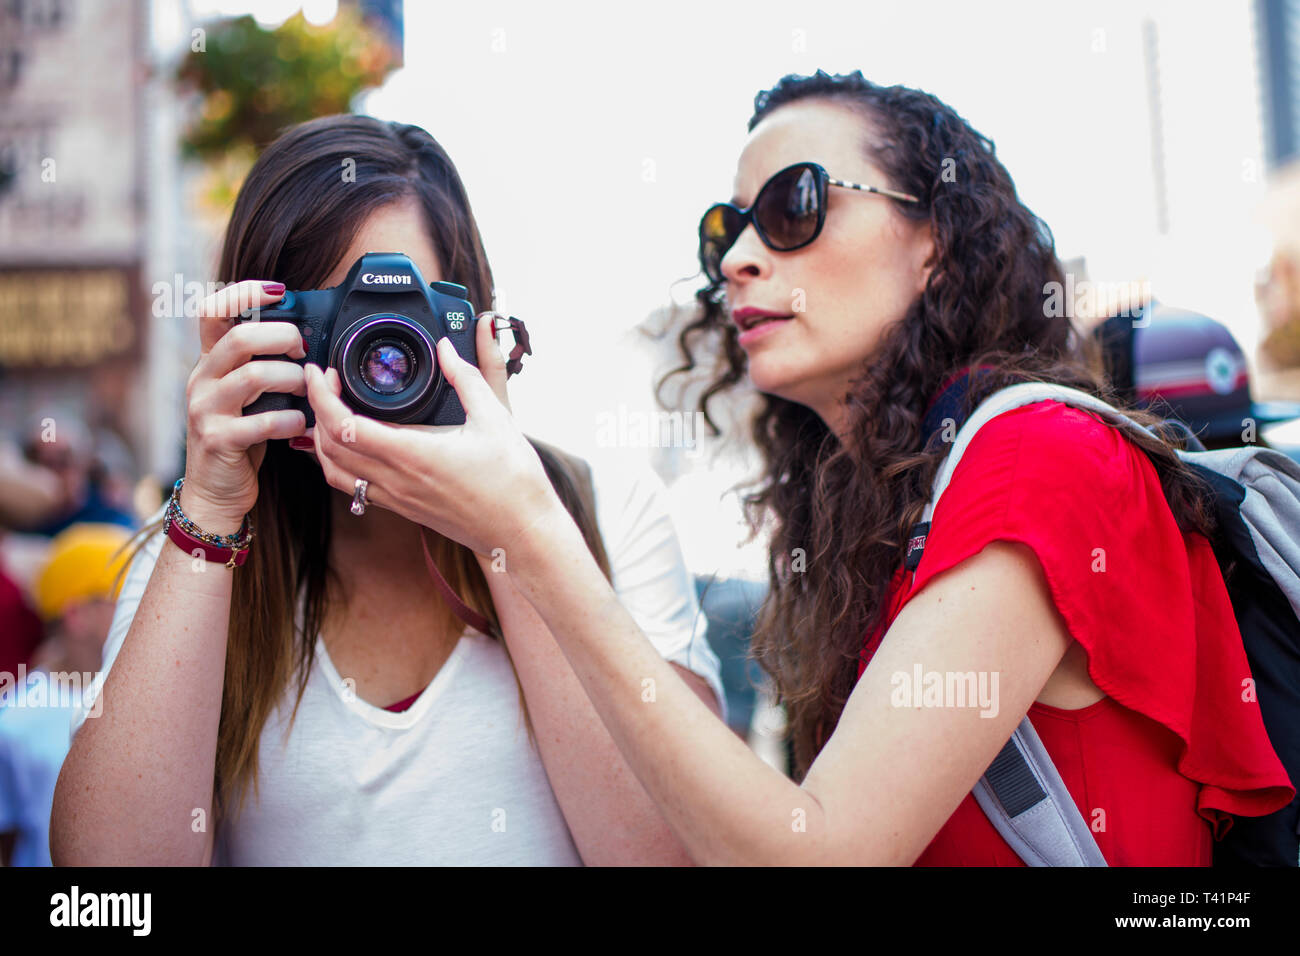 Women photographers on a crowded street take pictures with a camera Stock Photo